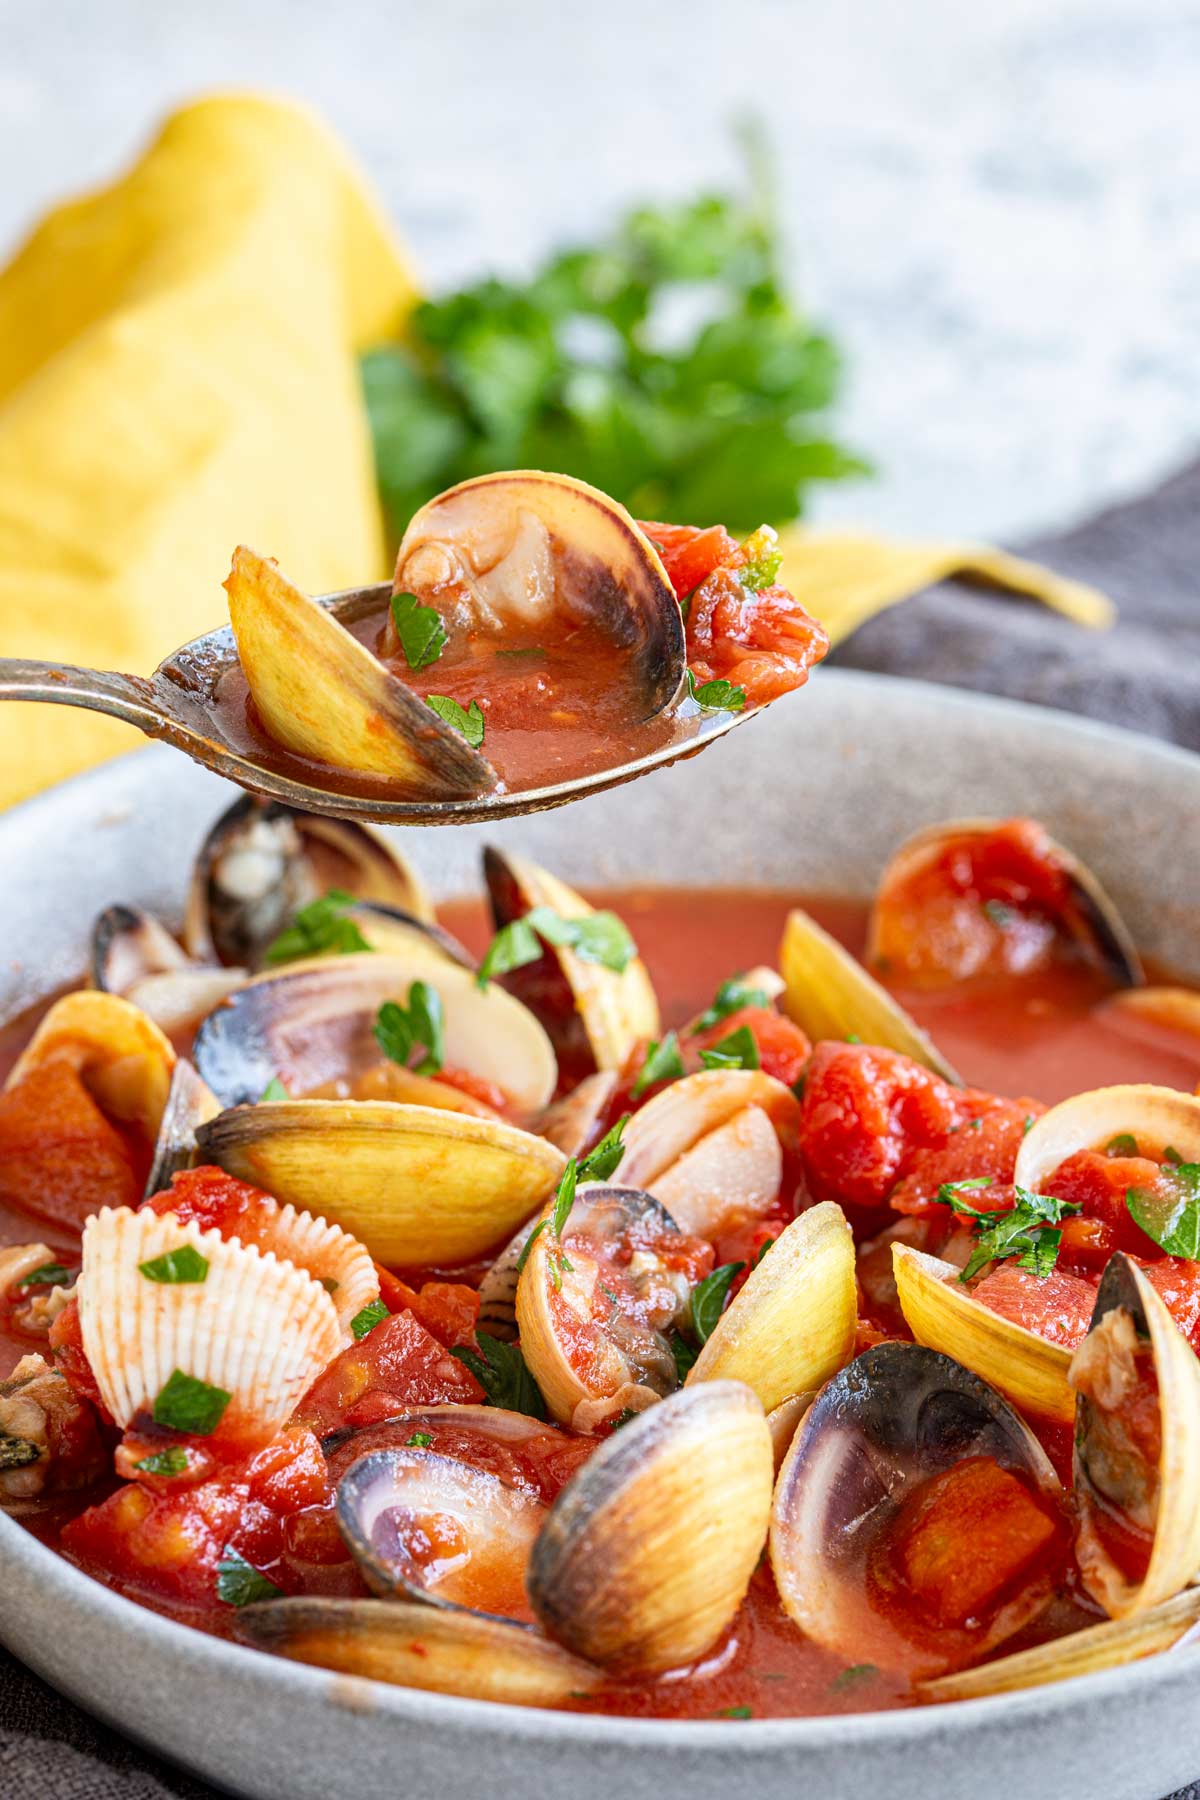 a spoon lifting up a clam and some tomato broth from a grey bowl